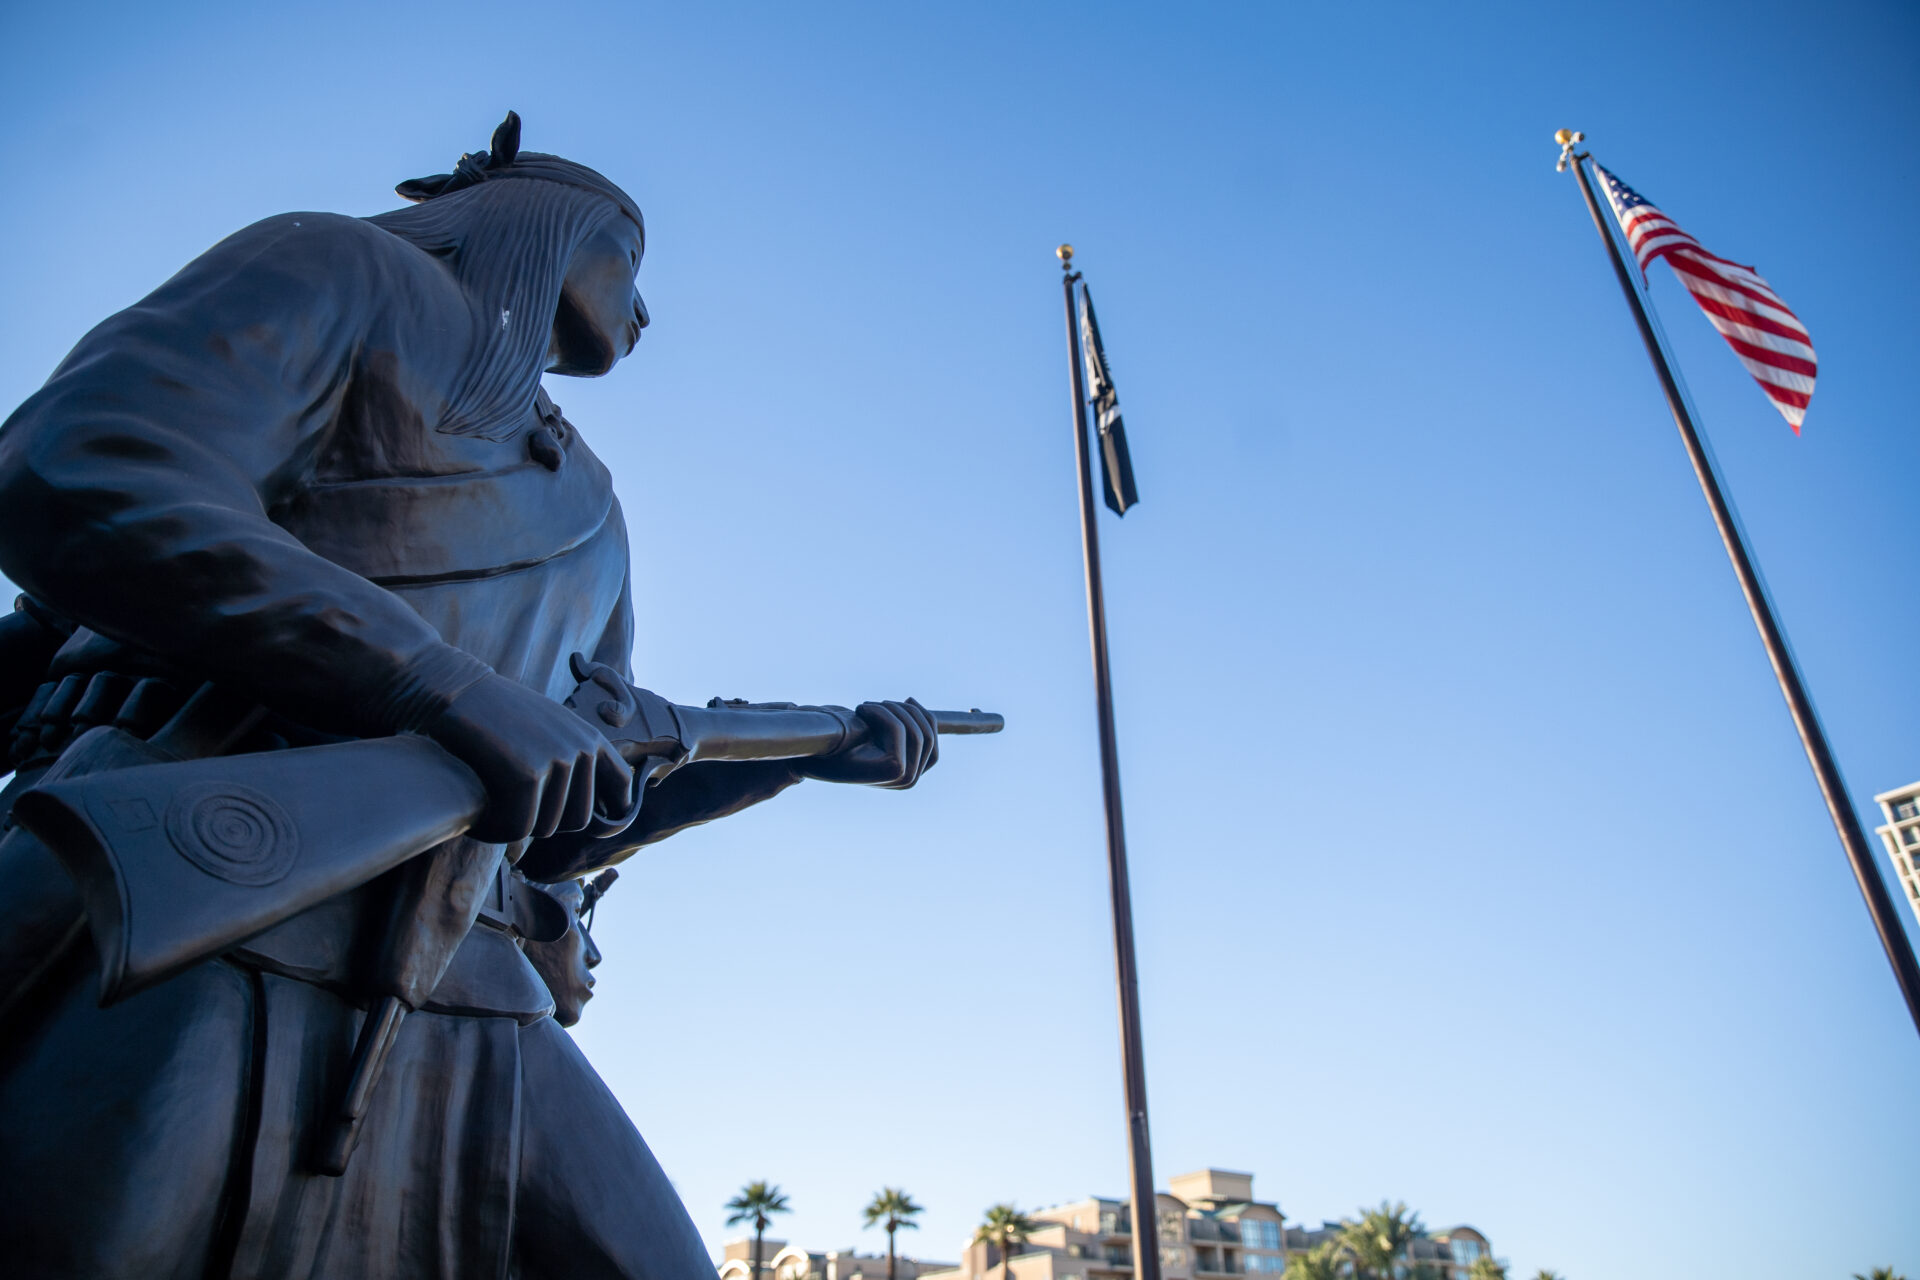 A sculpture of a Native man holding a rifle next to pole flags.